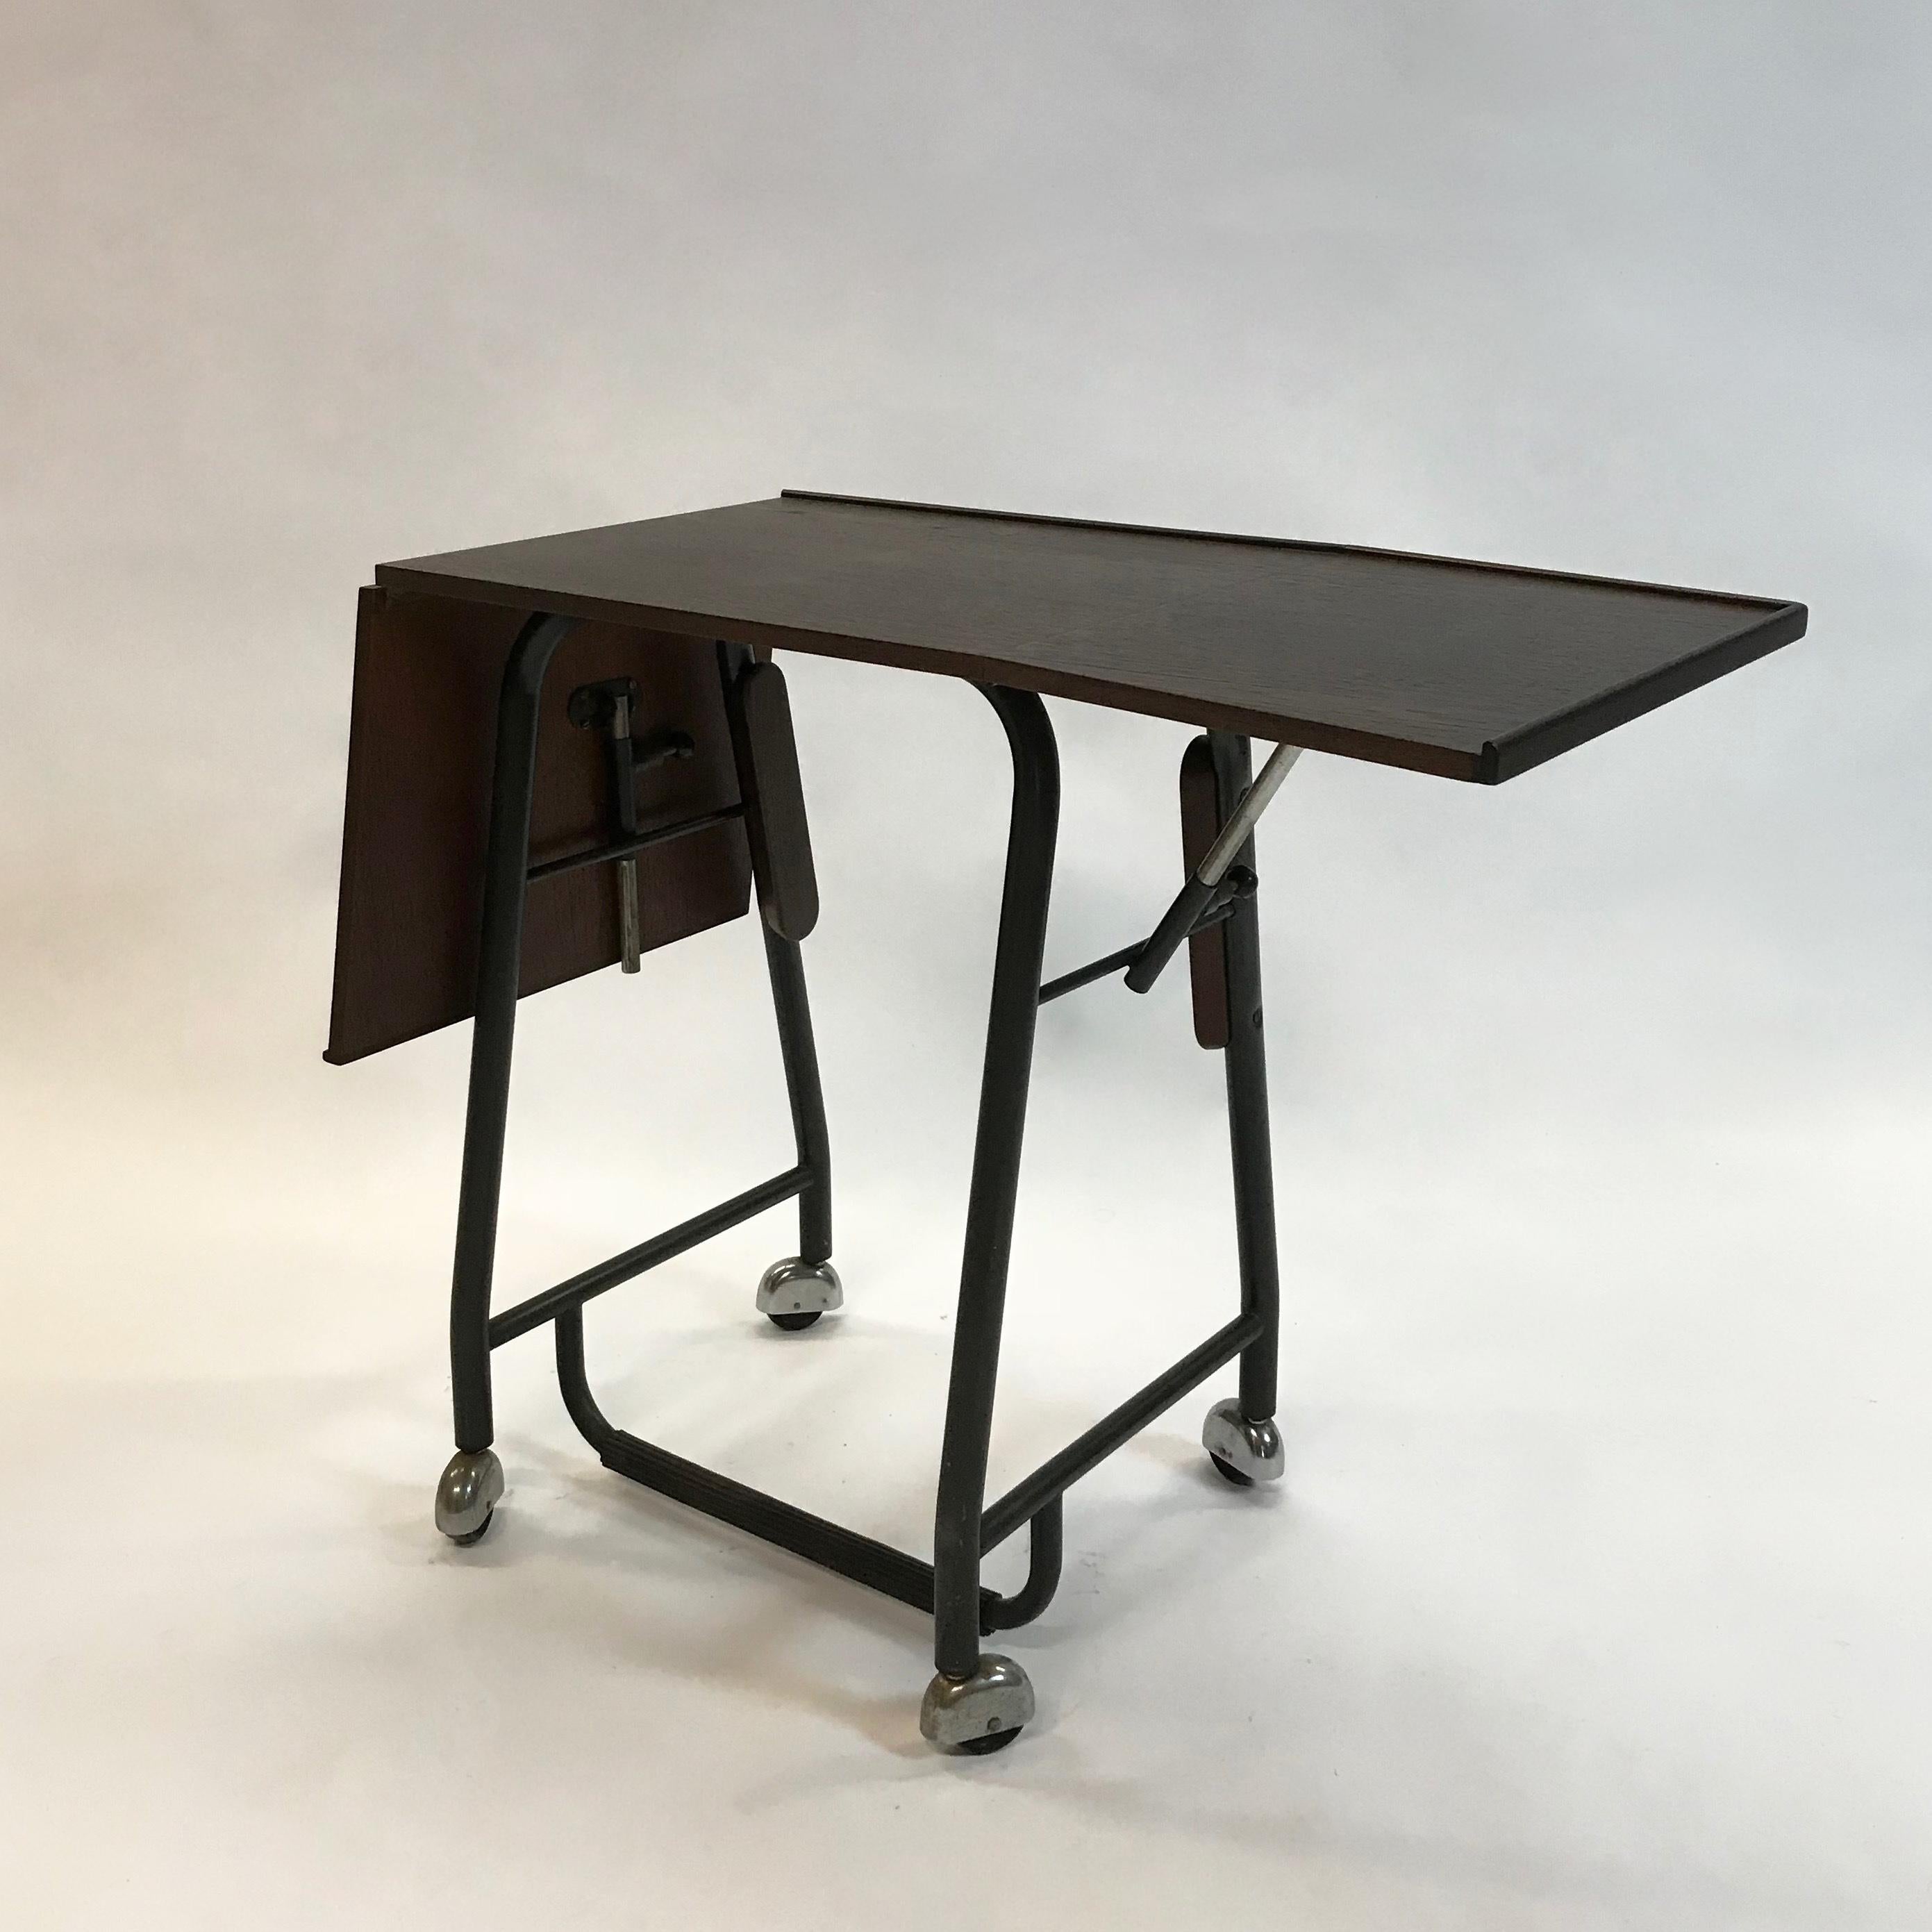 American Kevi Gate-Fold Rolling Typewriter Table by Jorgen Rasmussen for Knoll